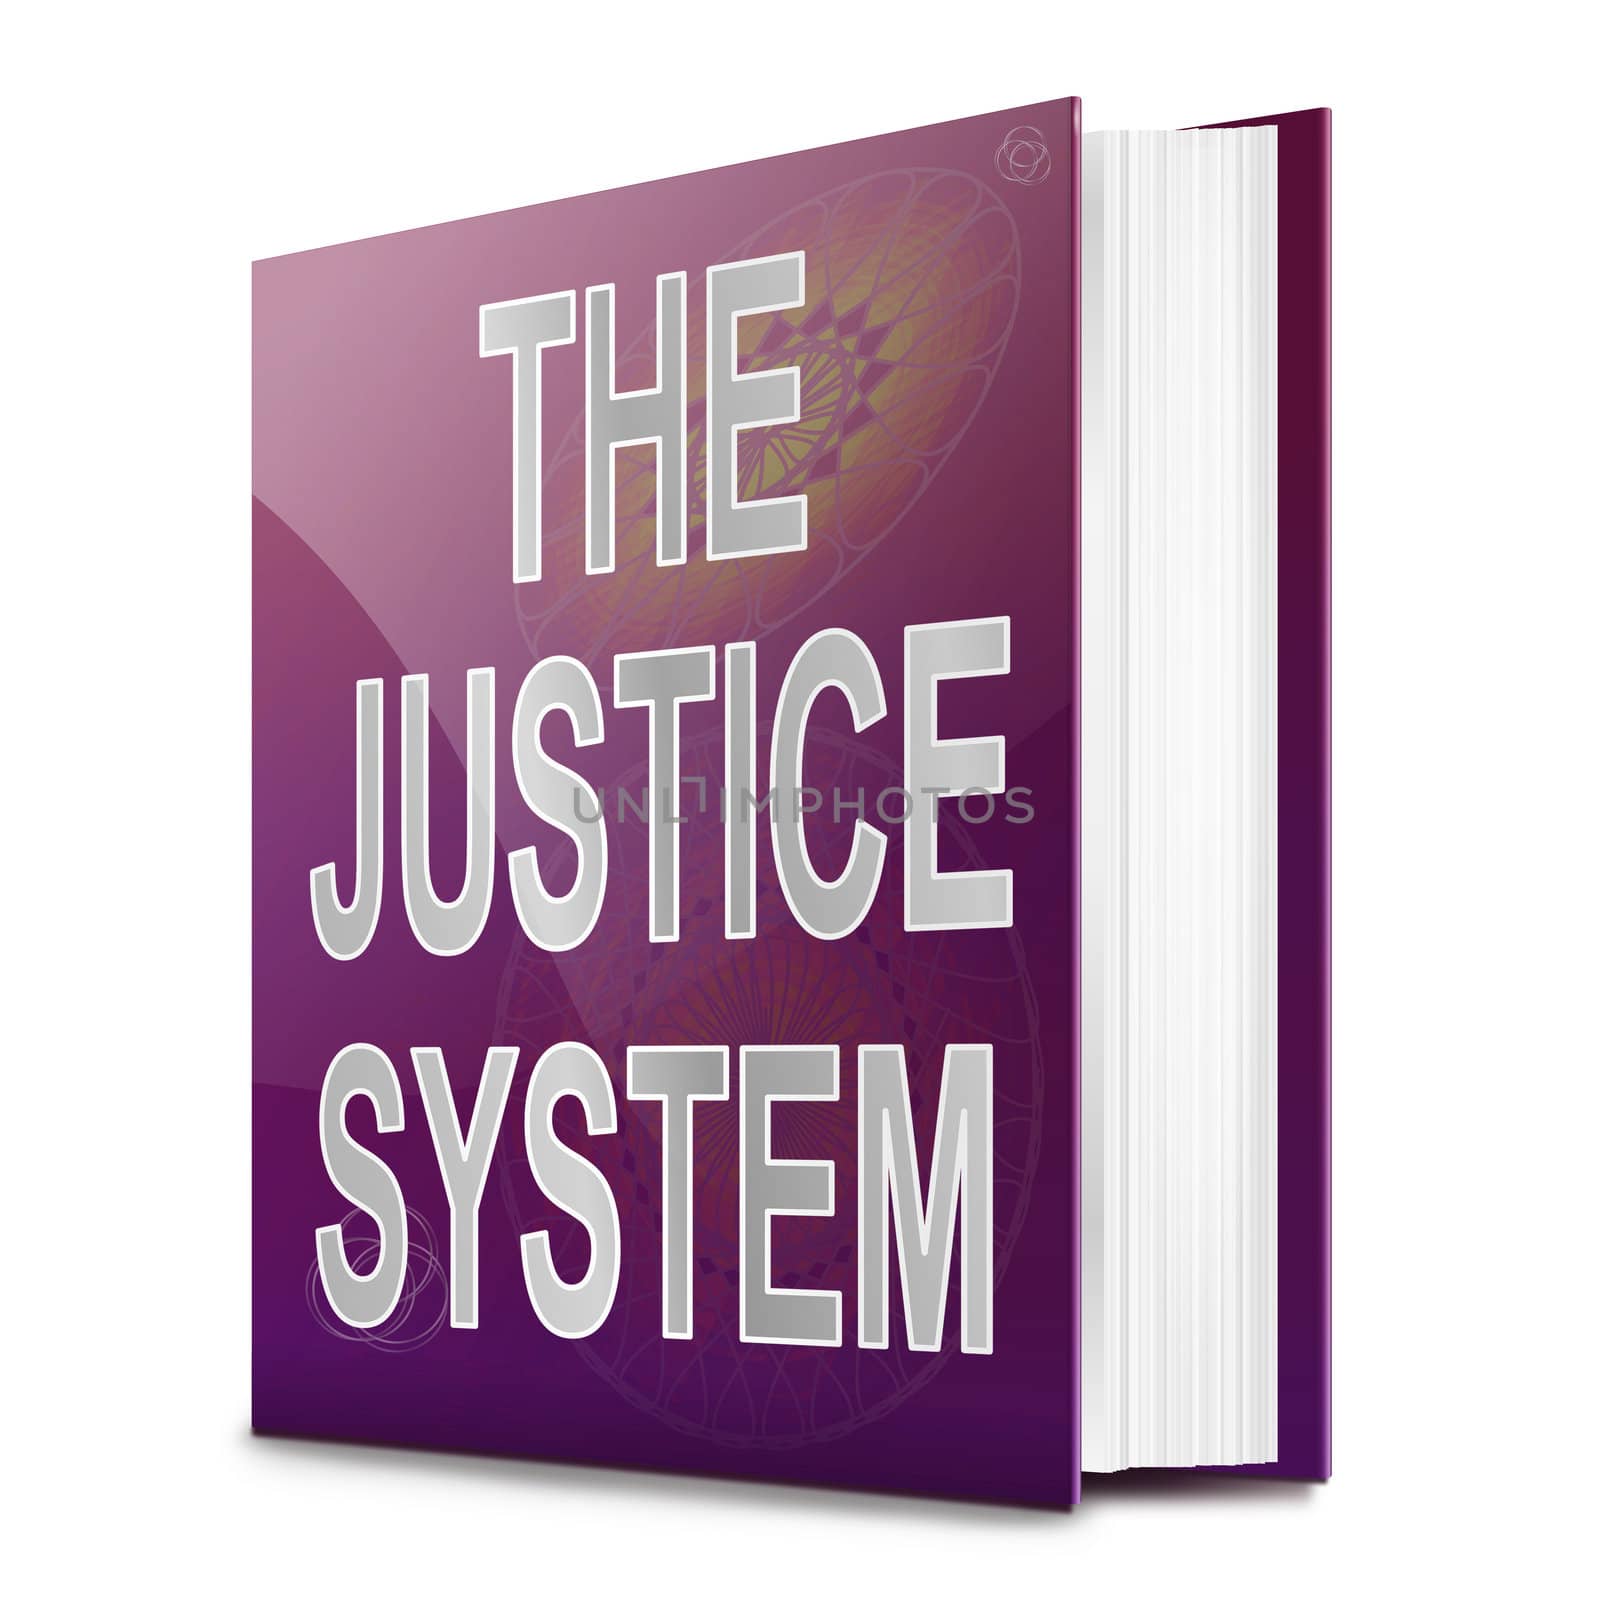 Illustration depicting a text book with a justice system concept title. White background.